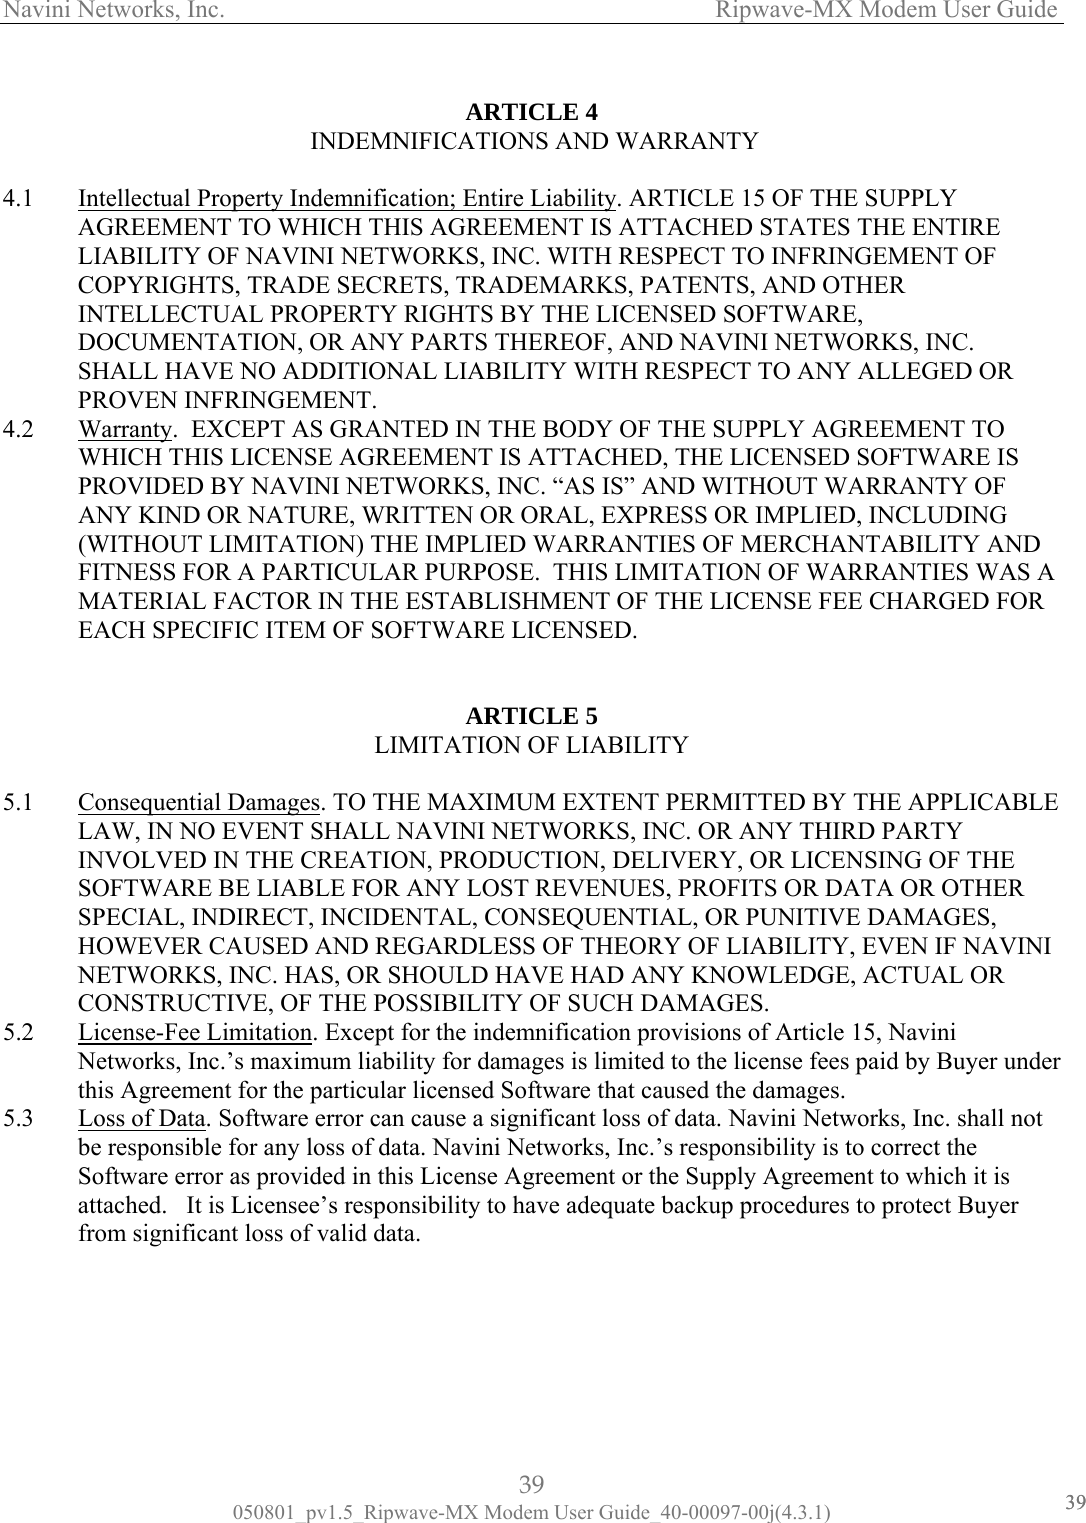 Navini Networks, Inc.                   Ripwave-MX Modem User Guide  ARTICLE 4 4.1  Intellectual Property Indemnifica INDEMNIFICATIONS AND WARRANTY   tion; Entire Liability. ARTICLE 15 OF THE SUPPLY AGREEMENT TO WHICH THIS AGREEMENT IS ATTACHED STATES THE ENTIRE LIABILITY OF NAVINI NETWORKS, I TH RESPECT TO INFRINGEMENT OF COPYRIGHTS, TRADE SECRETS, TRADEMARKS, PATENTS, AND OTHER INTELLECTUAL PROPERTY RIGHTS BY THE LICENSED SOFTWARE, DOCUMENTATION, OR ANY PARTS THEREOF, AND NAVINI NETWORKS, INC. SHALL HAVE NO ADDITION SPECT TO ANY ALLEGED OR PROVEN INFRINGEMENT. NC. WIAL LIABILITY WITH RE4.2  Warranty.  EXCEPT AS GRANTED IN THE BODY OF THE SUPPLY AGREEMENT TO WHICH THIS LICENSE AGREEMENT IS ATTACHED, THE LICENSED SOFTWARE IS PROVIDED BY NAVINI NETWORKS, INC. “AS IS” AND WITHOUT WARRANTY OF ANY KIND OR NATURE, WRITTEN OR ORAL, EXPRESS OR IMPLIED, INCLUDING (WITHOUT LIMITATION) THE IMP ANTIES OF MERCHANTABILITY AND FITNESS FOR A PARTICULAR PURPOSE.  THIS LIMITATION OF WARRANTIES WAS A  LIED WARRMATERIAL FACTOR IN THE ESTABLISHMENT OF THE LICENSE FEE CHARGED FOR EACH SPECIFIC ITEM OF SOFTWARE LICENSED.  ARTICLE 5 LIMITATION OF LIABILITY   5.1  Consequential Damages. TO THE MAXIMUM EXTENT PERMITTED BY THE APPLICABLELAW, IN NO EVENT SHALL NAVINI NETWORKS, INC. OR ANY THIRD PARTY INVOLVED IN THE CREATION, PRODUCTION, DELIVERY, OR LICENSING OF THE SOFTWARE BE LIABLE FOR ANY LOST REVENUES, PROFITS OR DATA OR OTHER SPECIAL, INDIRECT, INCIDENTAL, CONSEQUENTIAL, OR PUNITIVE DAMAGES, HOWEVER CAUSED AND REGARDLESS OF THEORY OF LIABILITY, EVEN IF NAVININETWORKS, INC. HAS, OR SHOULD HAVE HAD ANY KNOWLEDGE, ACTUAL OR CONSTRUCTIVE, OF THE POSSIBILITY OF SUCH DAMAGES.   5.2  License-Fee Limitation. Except for the indemnification provisions of Article 15, Navini Networks, Inc.’s maximum liability for damages is limited to the license fees paid by Buyer unthis Agreement for the particular licensed Software that caused the damages. der 5.3  Loss of Data. Software error can cause a significant loss of data. Navini Networks, Inc. shall not be responsible for any loss of data. Navini Networks, Inc.’s responsibility is to correct the Software error as provided in this License Agreement or the Supply Agreement to which it is attached.   It is Licensee’s responsibility to have adequate backup procedures to protect Buyer from significant loss of valid data. 39 050801_pv1.5_Ripwave-MX Modem User Guide_40-00097-00j(4.3.1) 3939